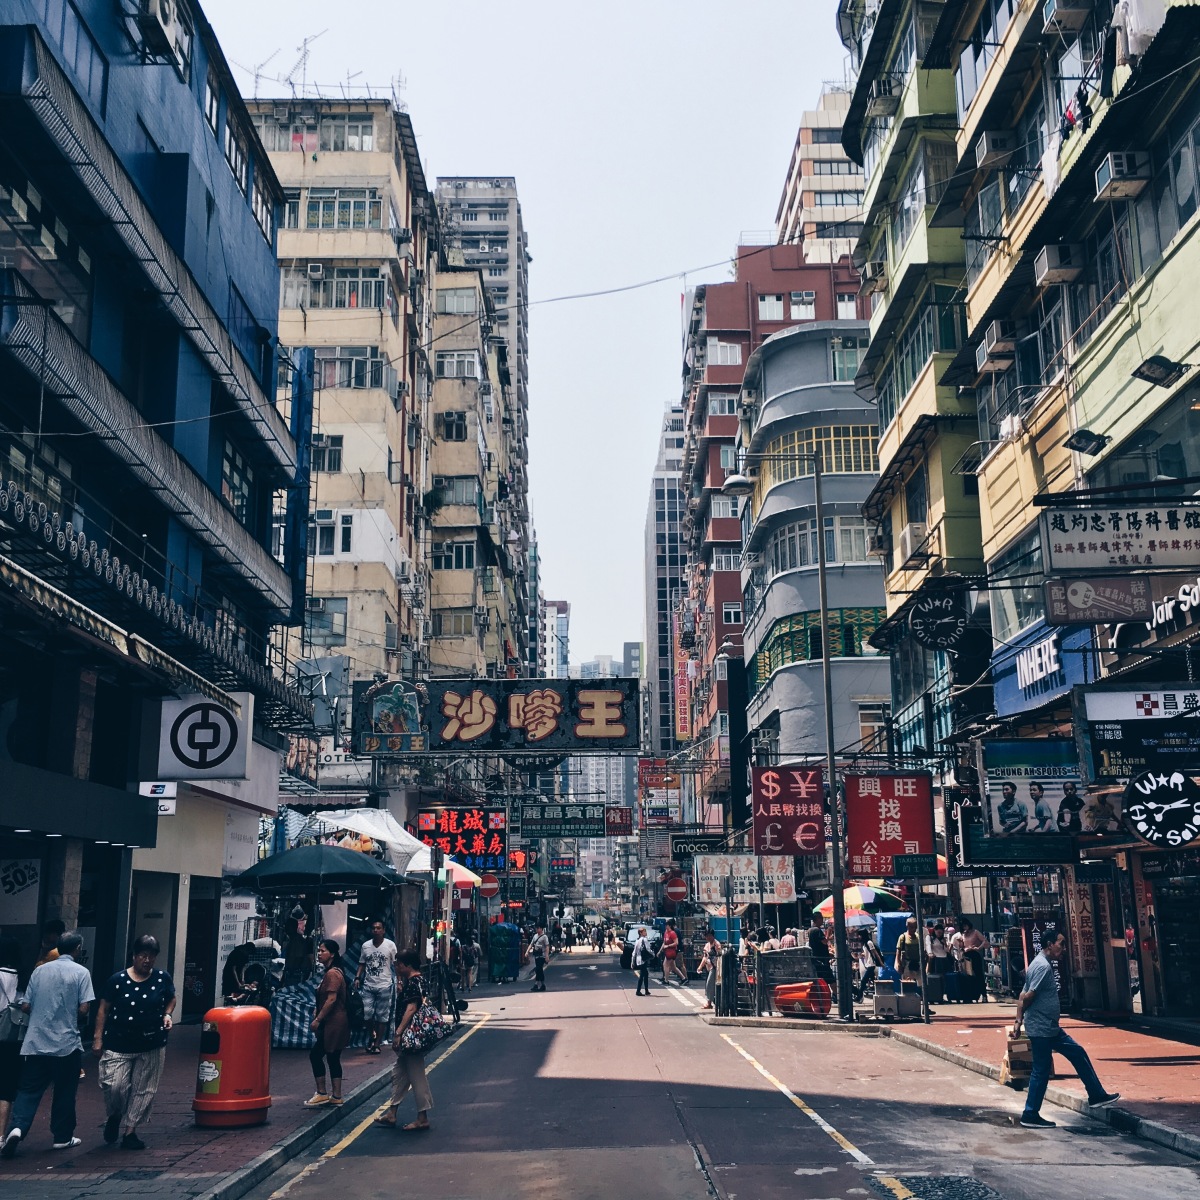 How to spend a layover in Hong Kong?